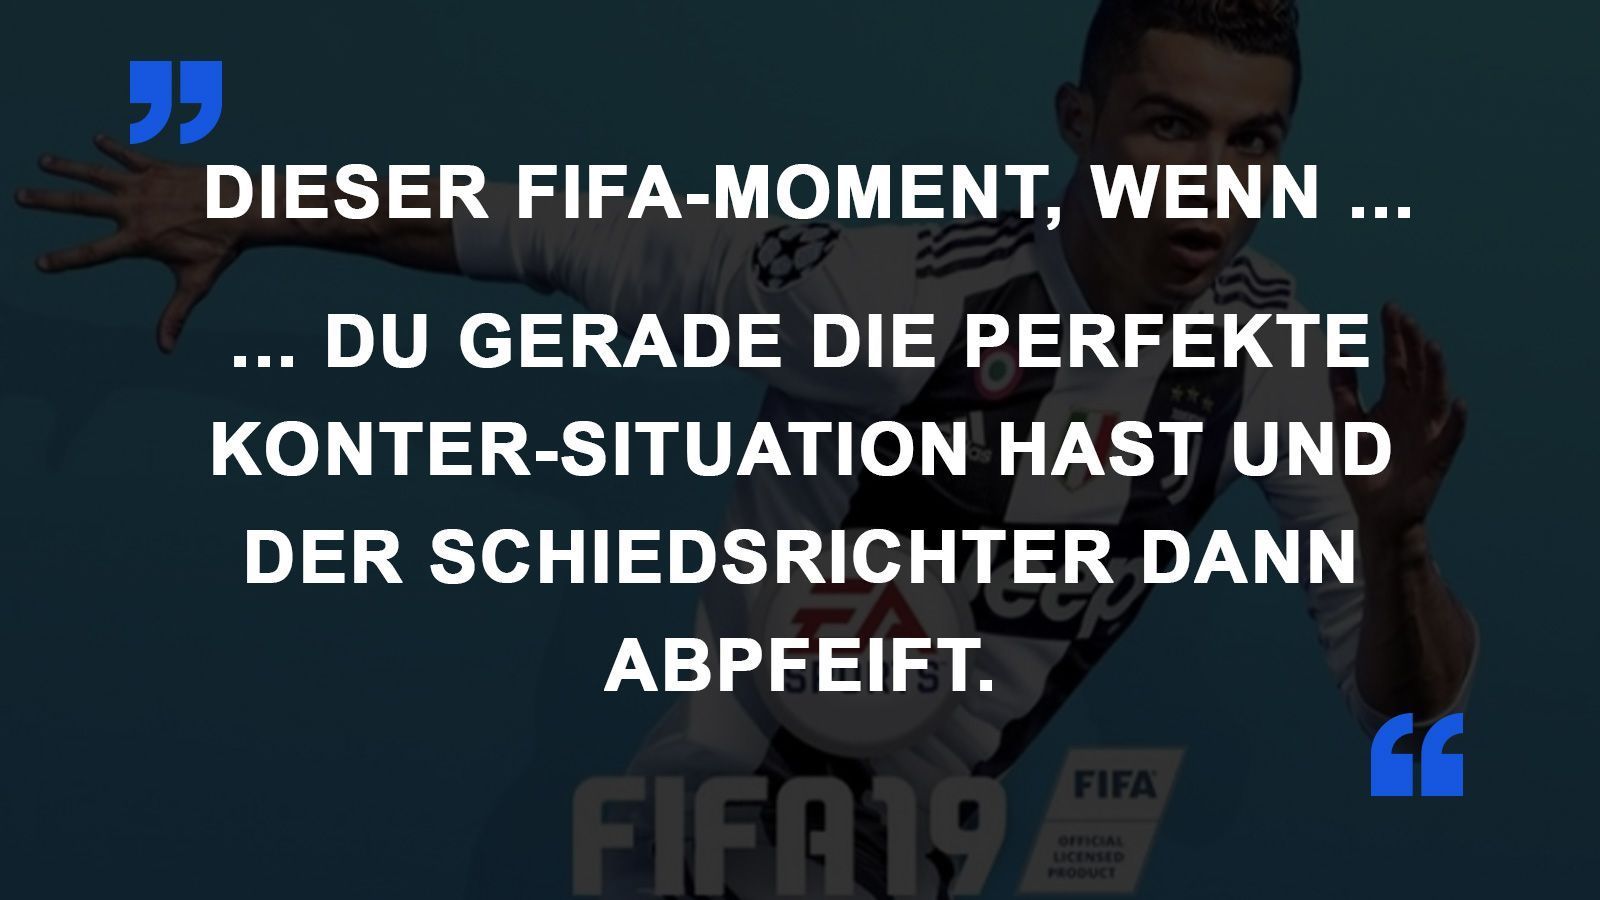 
                <strong>FIFA Momente Abpfiff</strong><br>
                
              